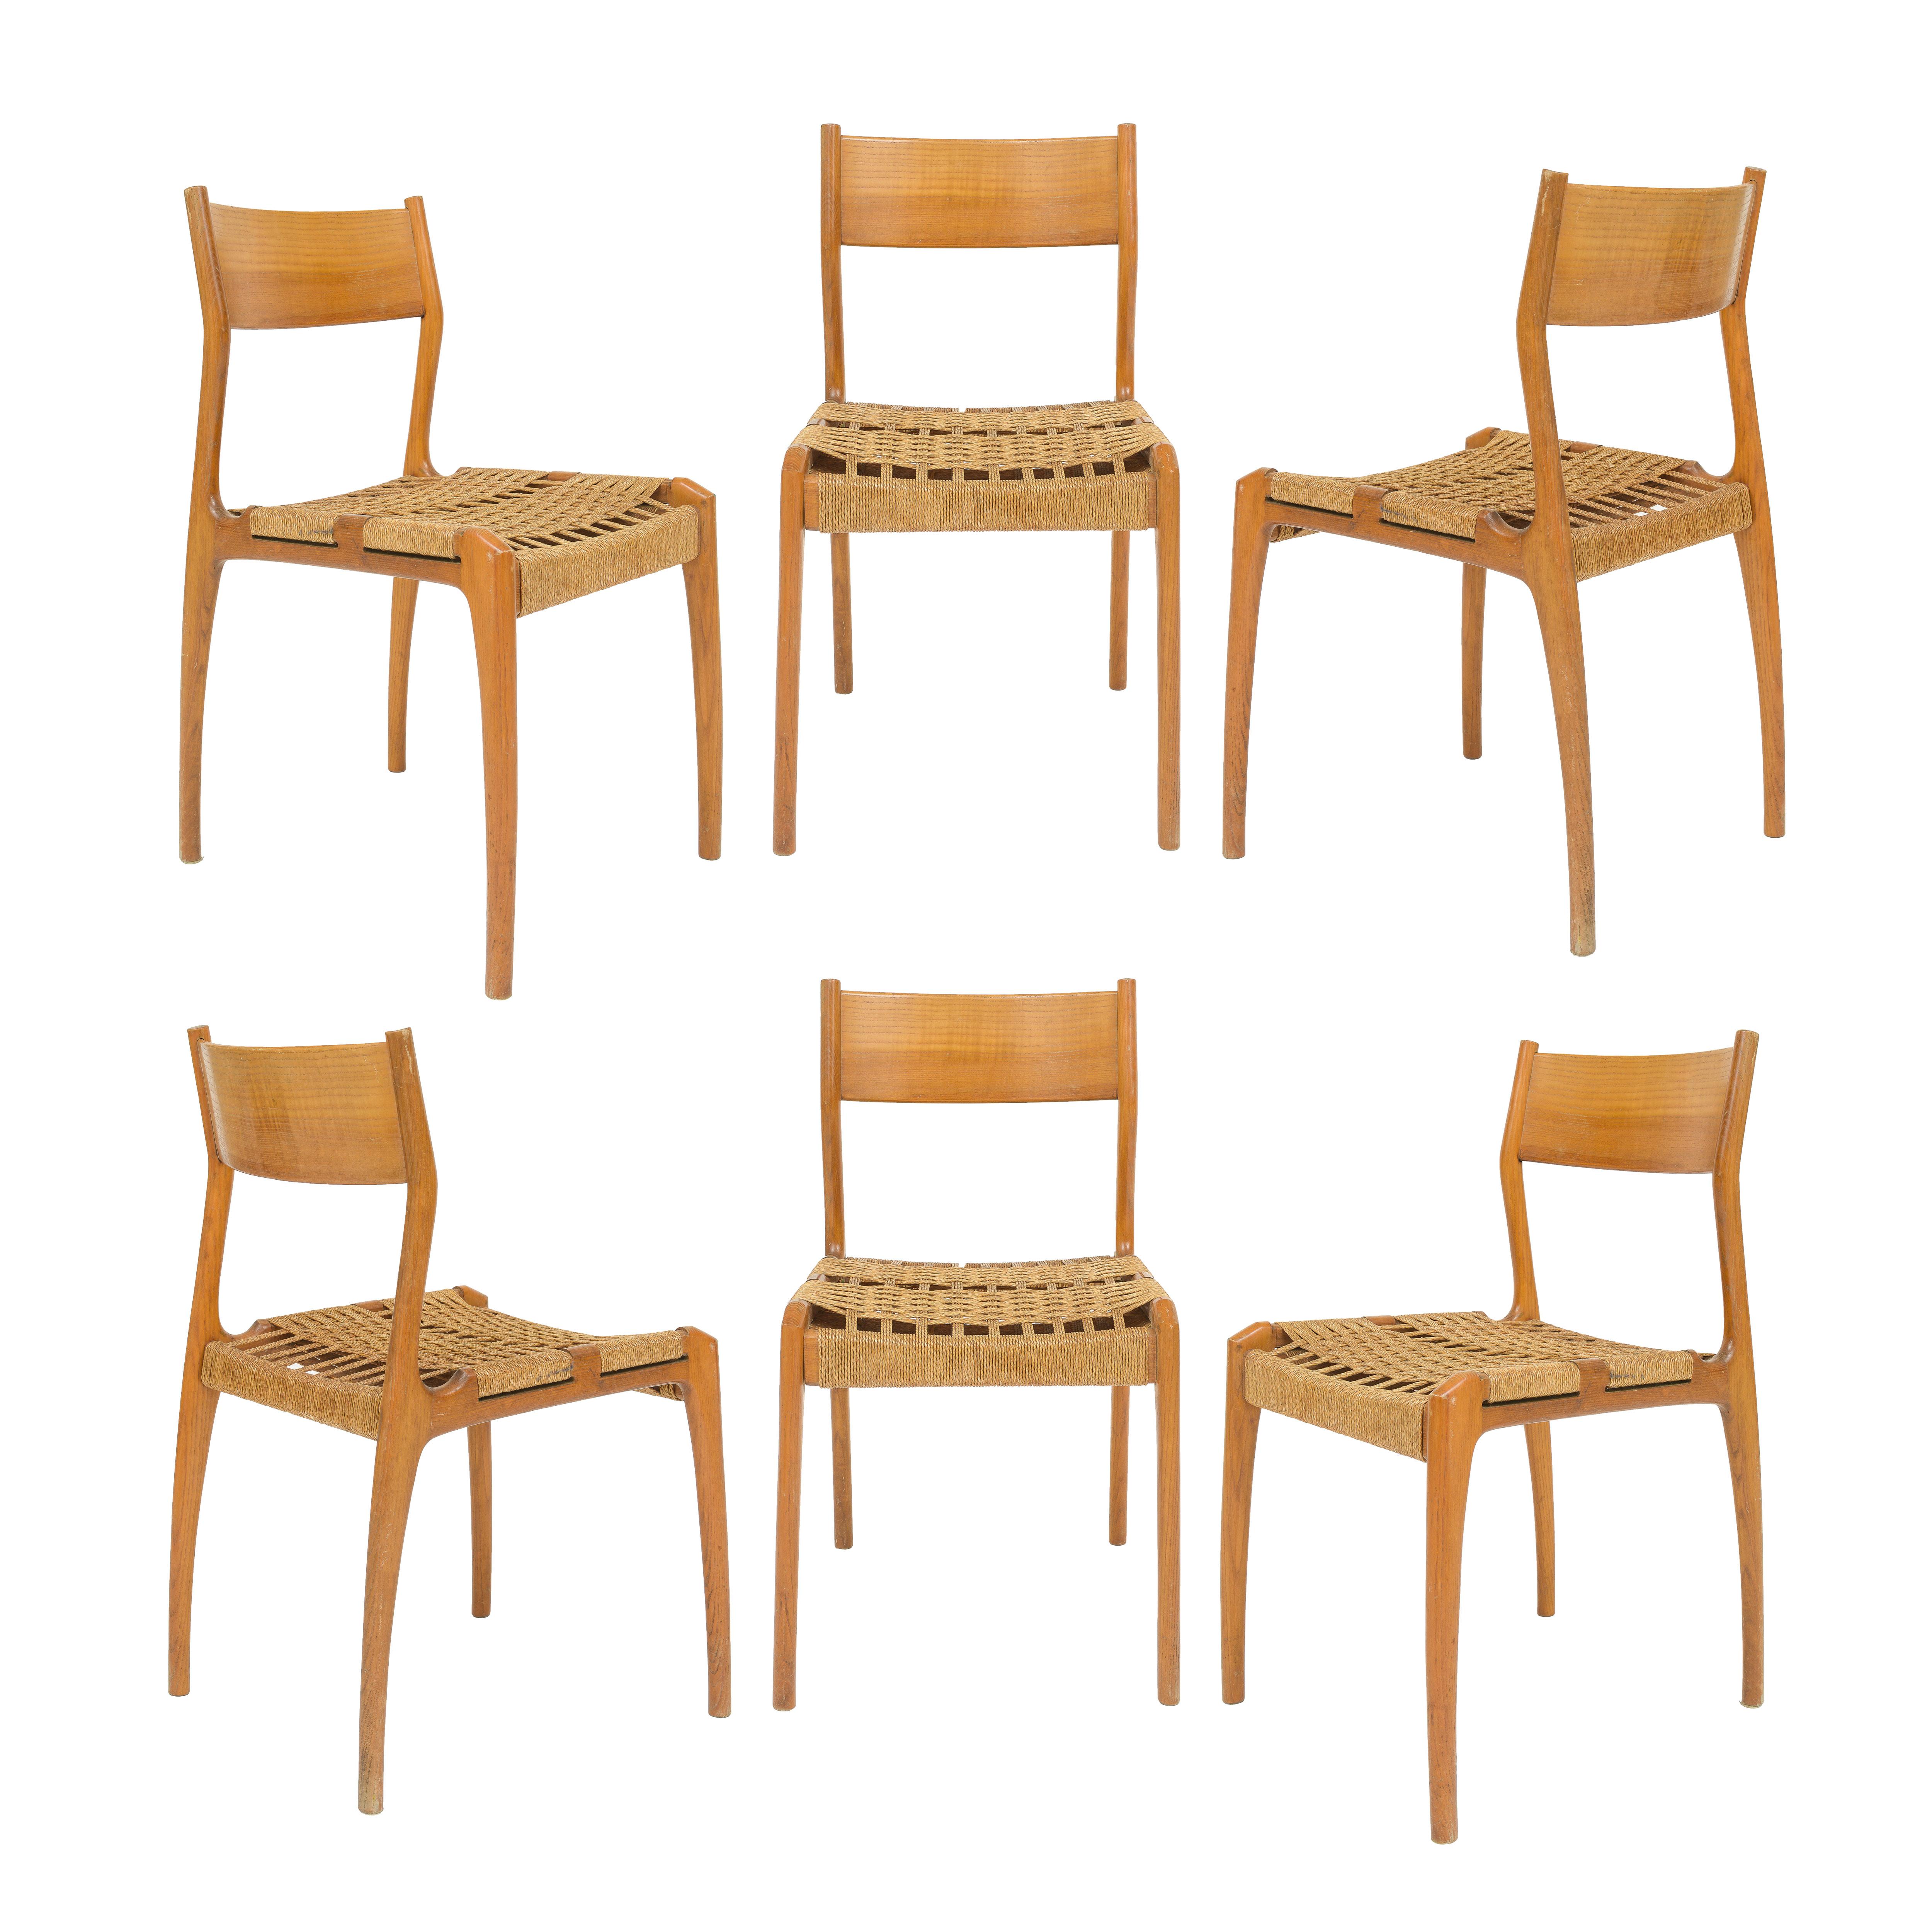 6 dining chairs imported from France. Beautiful condition. Rush seating and wood in excellent condition. Made in 1960's.